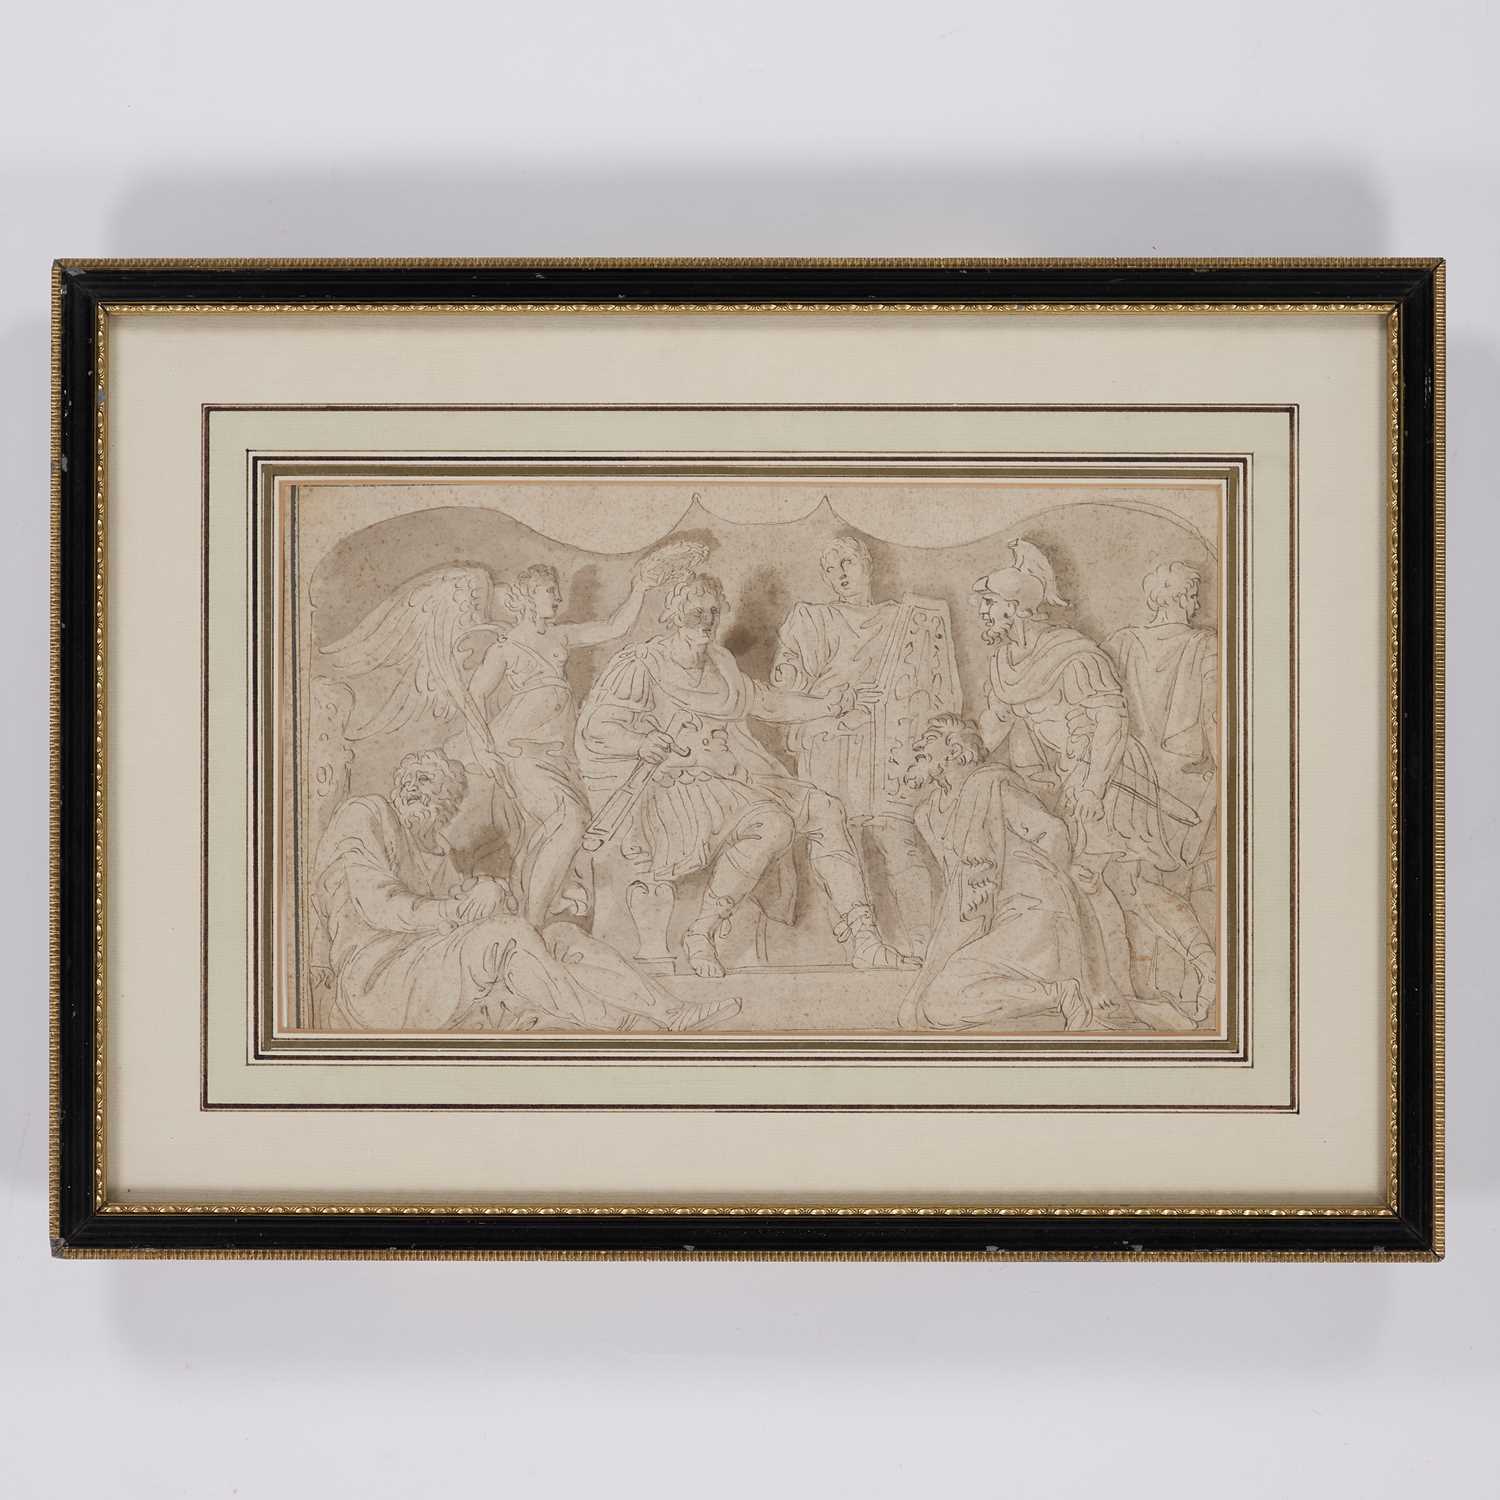 17TH/ 18TH CENTURY ITALIAN SCHOOL OLD MASTER DRAWING WITH AN EMPEROR AND CAPTIVES - Image 2 of 2